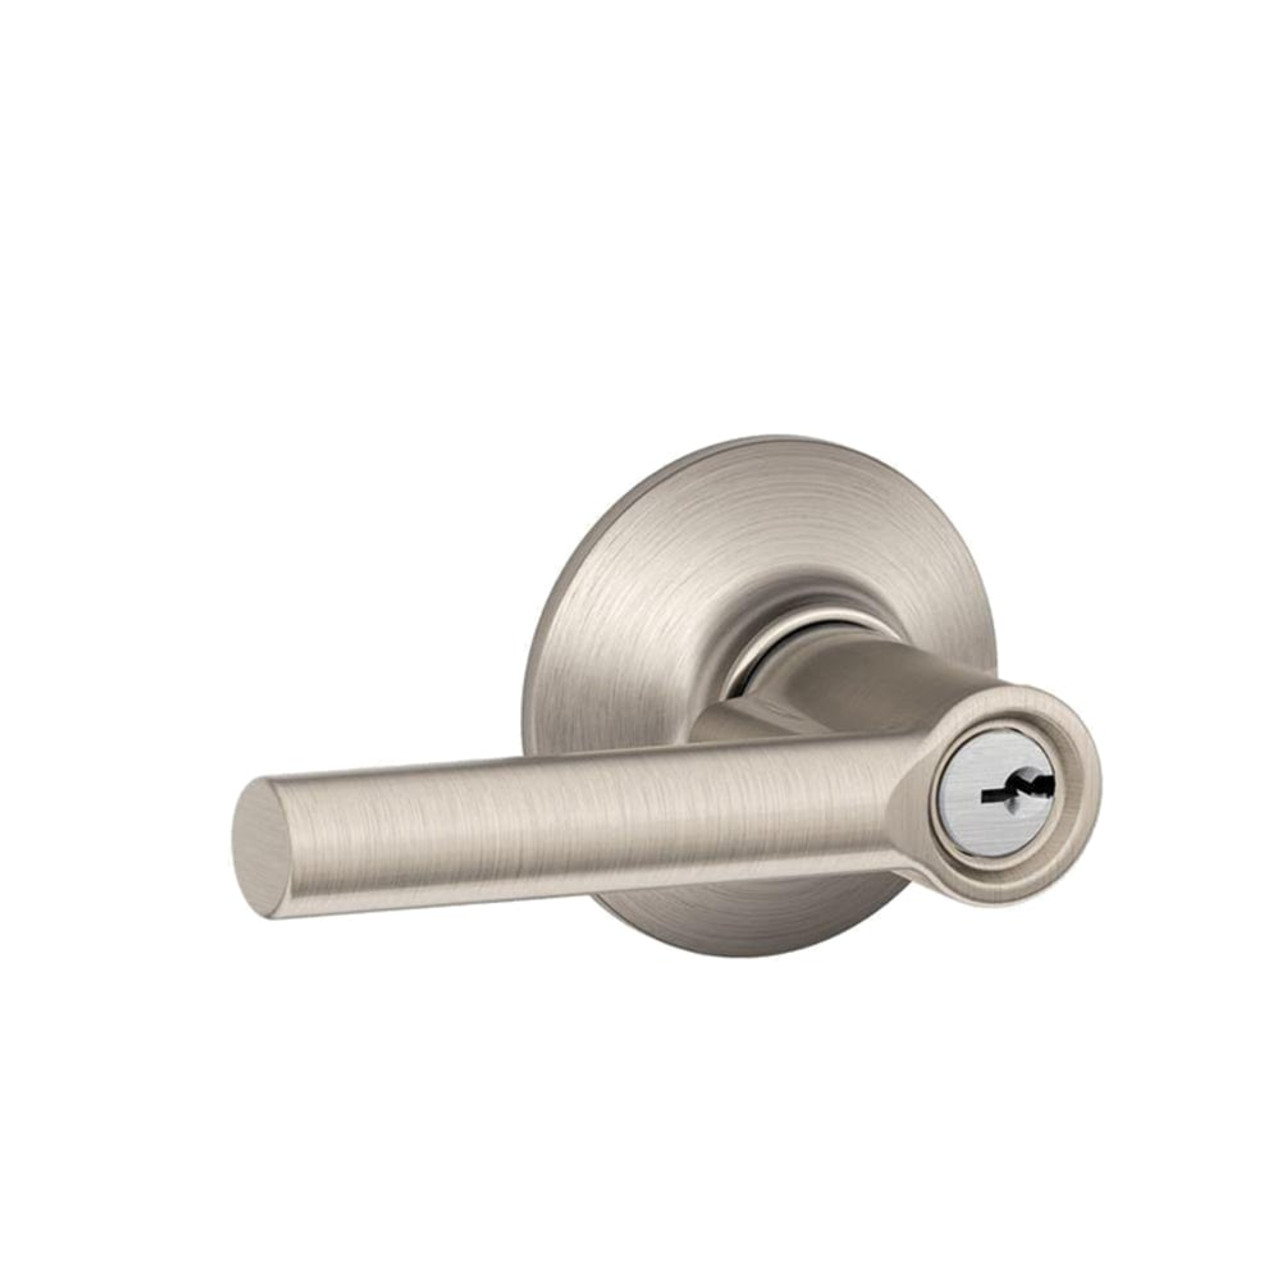 Schlage Residential F51A BRW 619 KD Grade Entry Lock Broadway Lever  Conventional Cylinder Keyed Different Satin Nickel Plated Clear Coated  Finish Non-Handed B and H Depot Door Hardware Shop